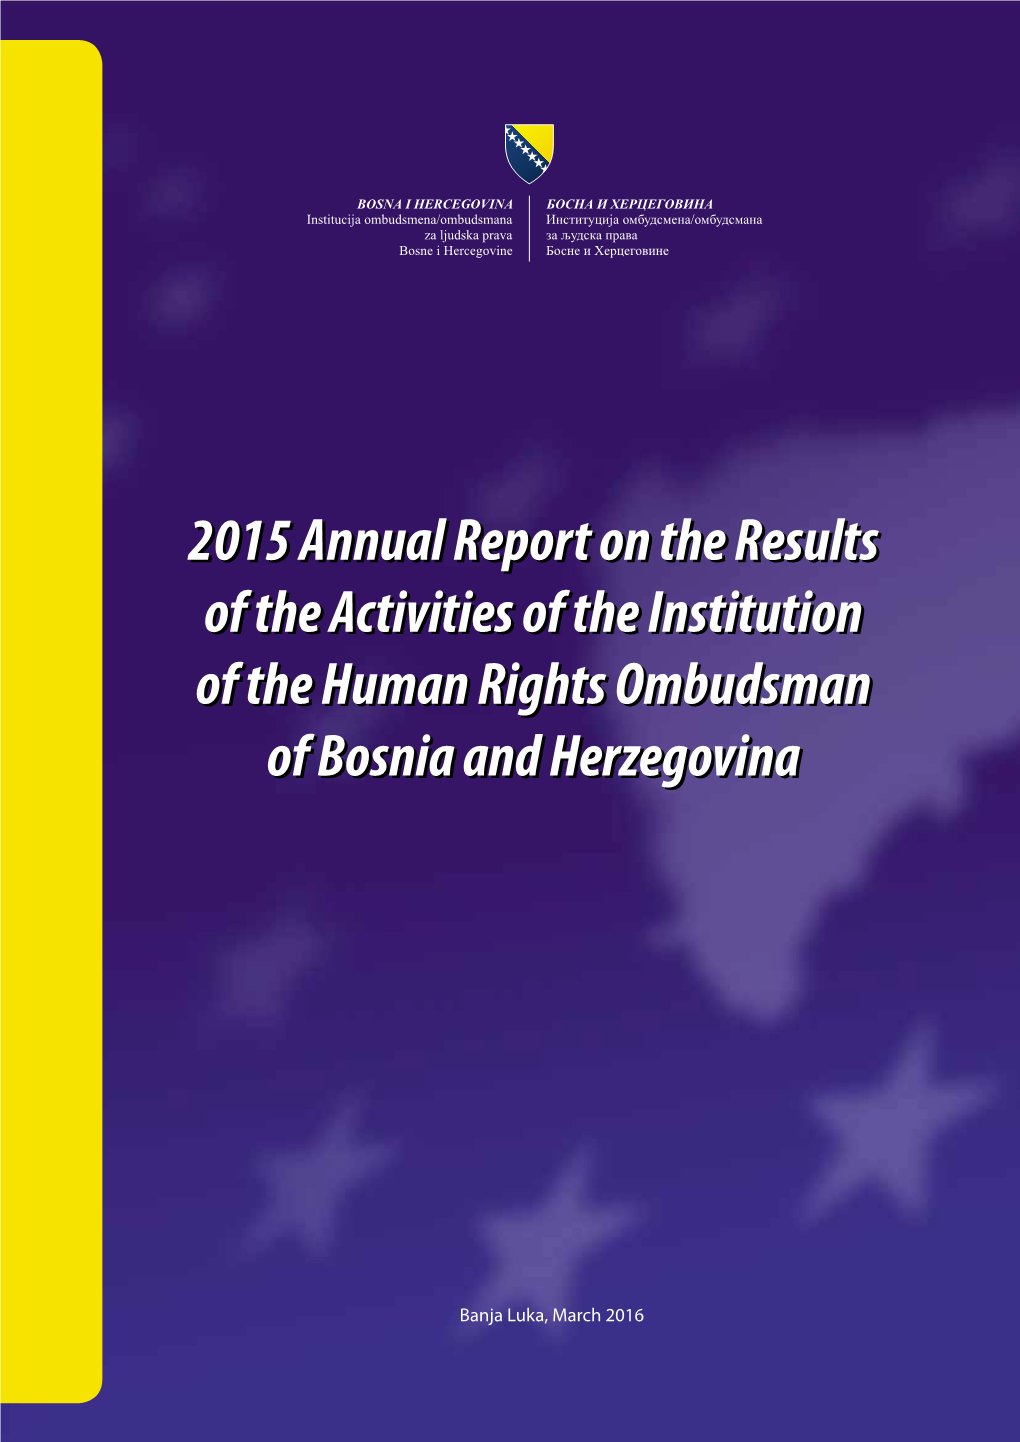 2015 Annual Report on the Results of the Activities of the Institution of the Human Rights Ombudsman of Bosnia and Herzegovina